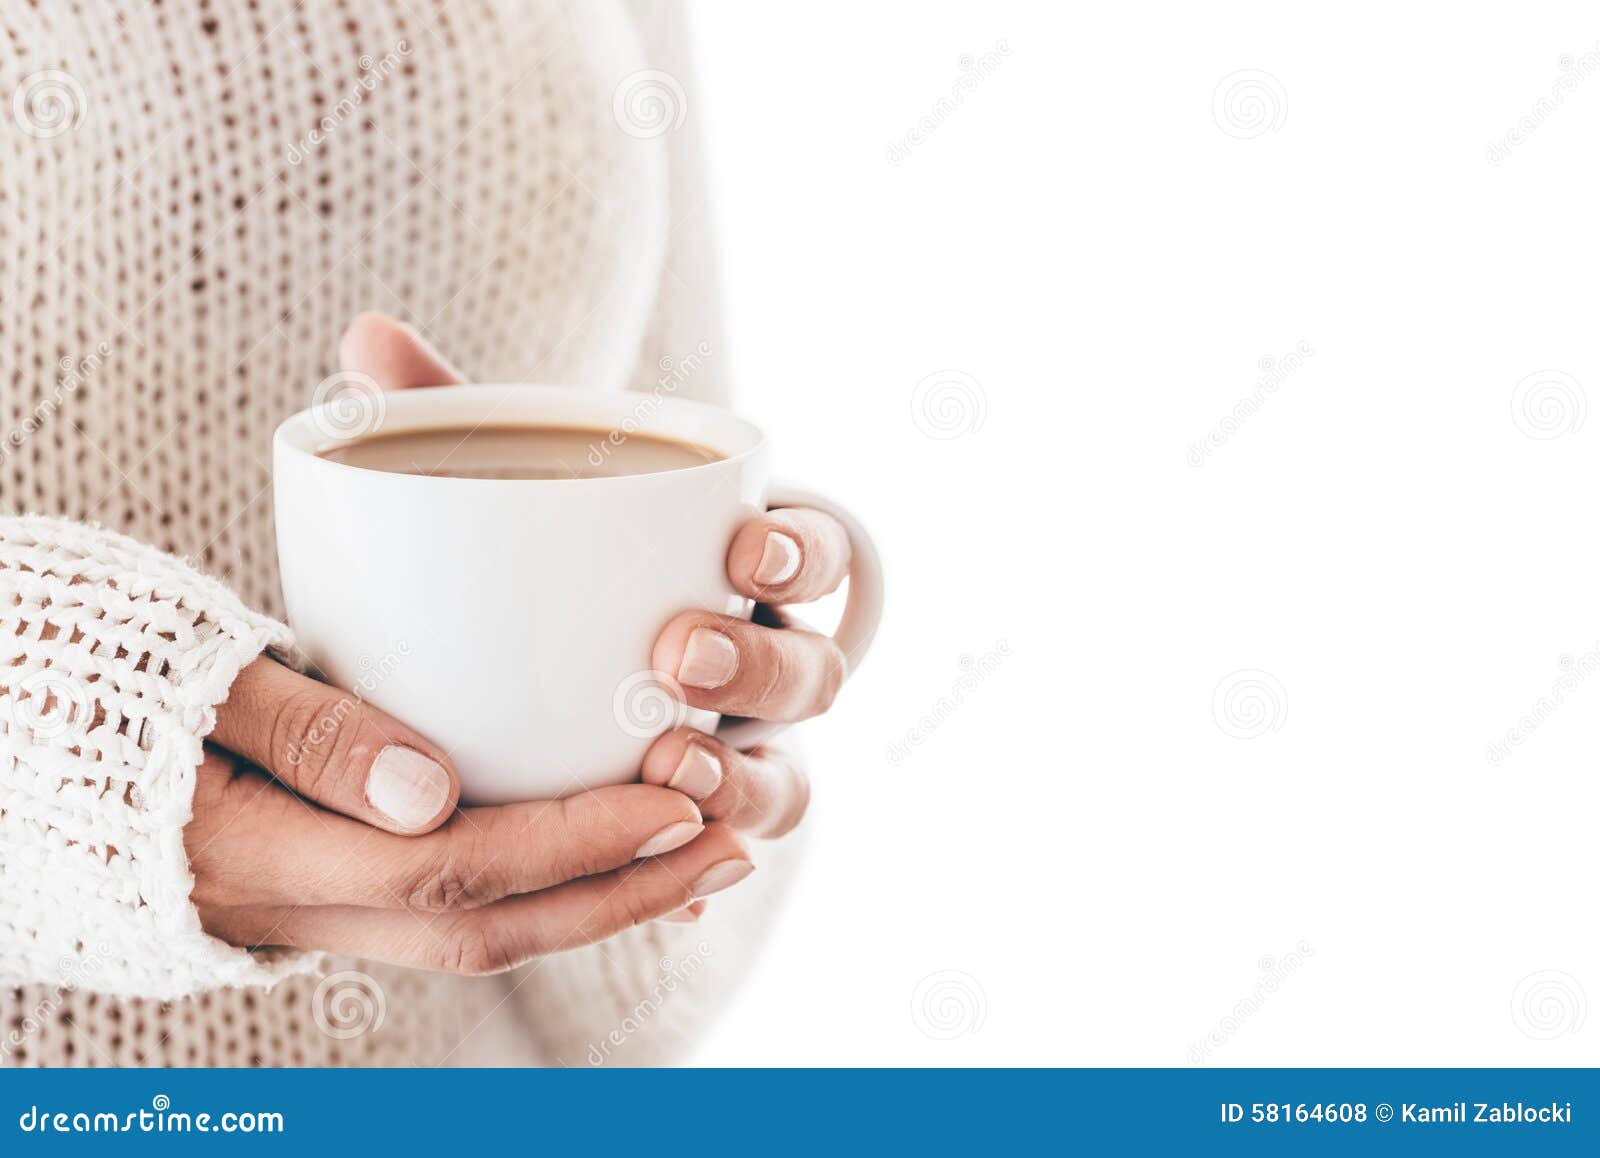 https://thumbs.dreamstime.com/z/warming-cup-coffee-hands-women-isolated-58164608.jpg